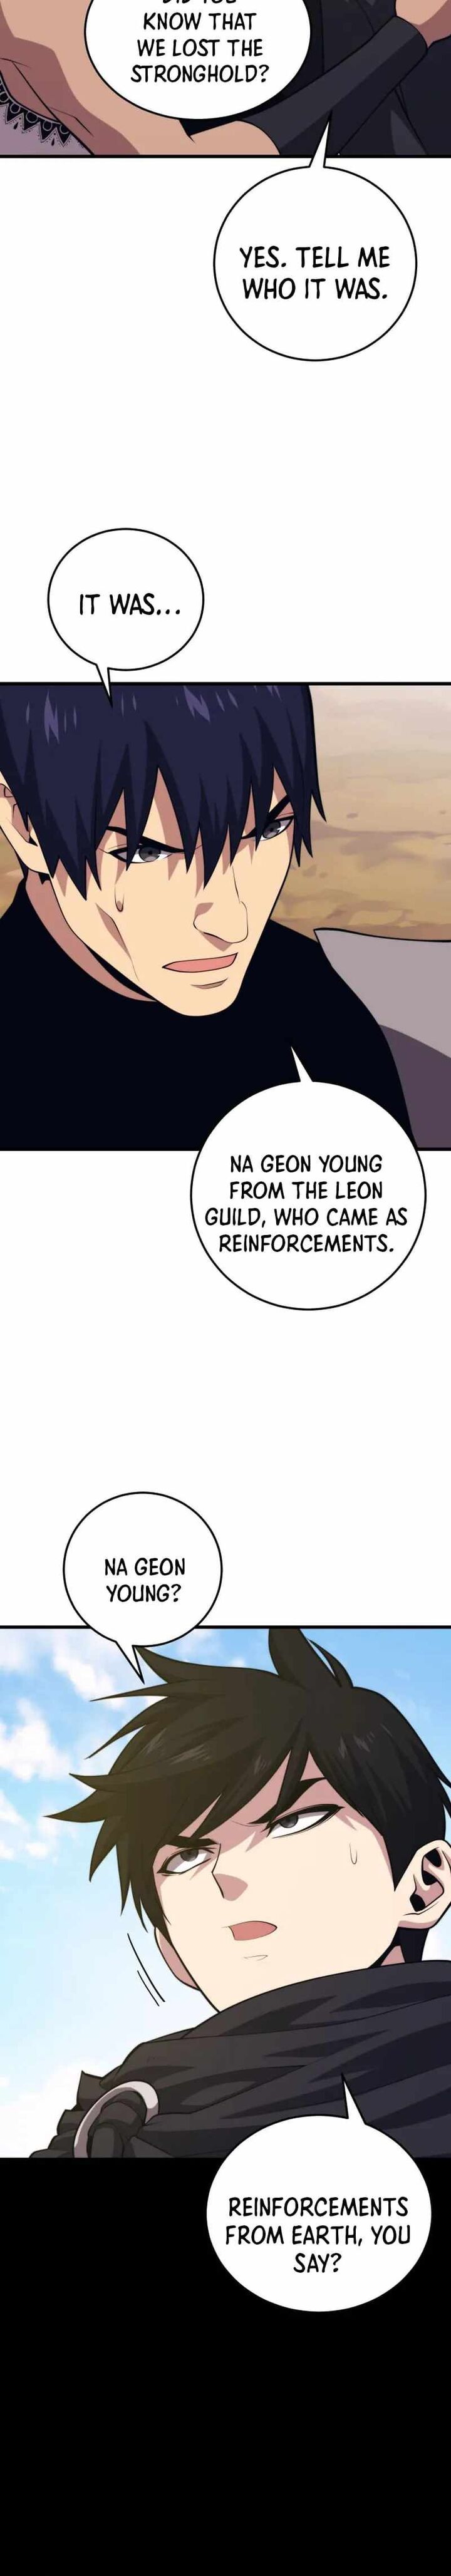 Seoul Stations Necromancer Chapter 123 Page 20